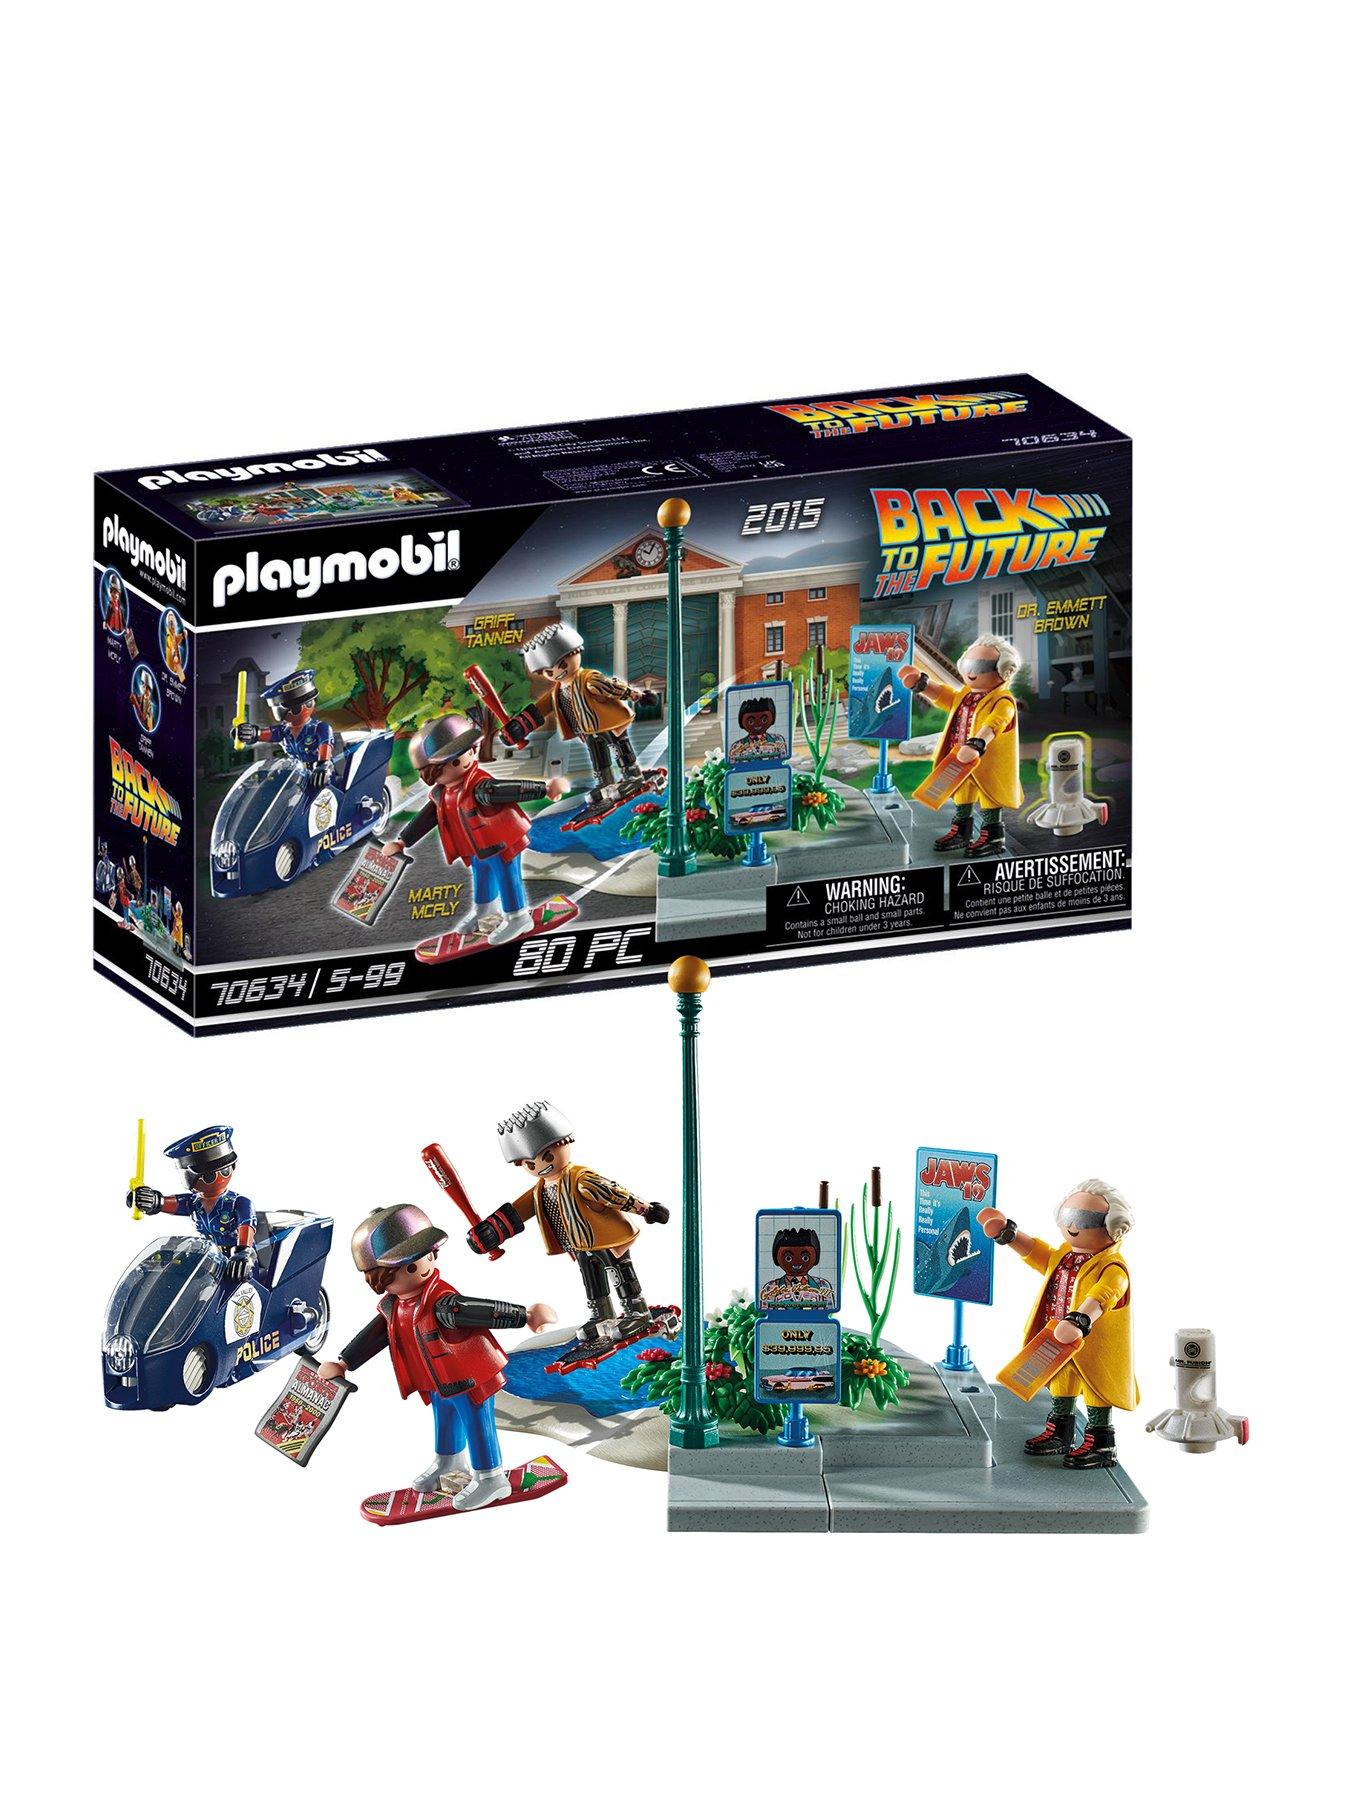 Bring the Playmobil Back to The Future Delorean to your collection at $35  (Save 30%)